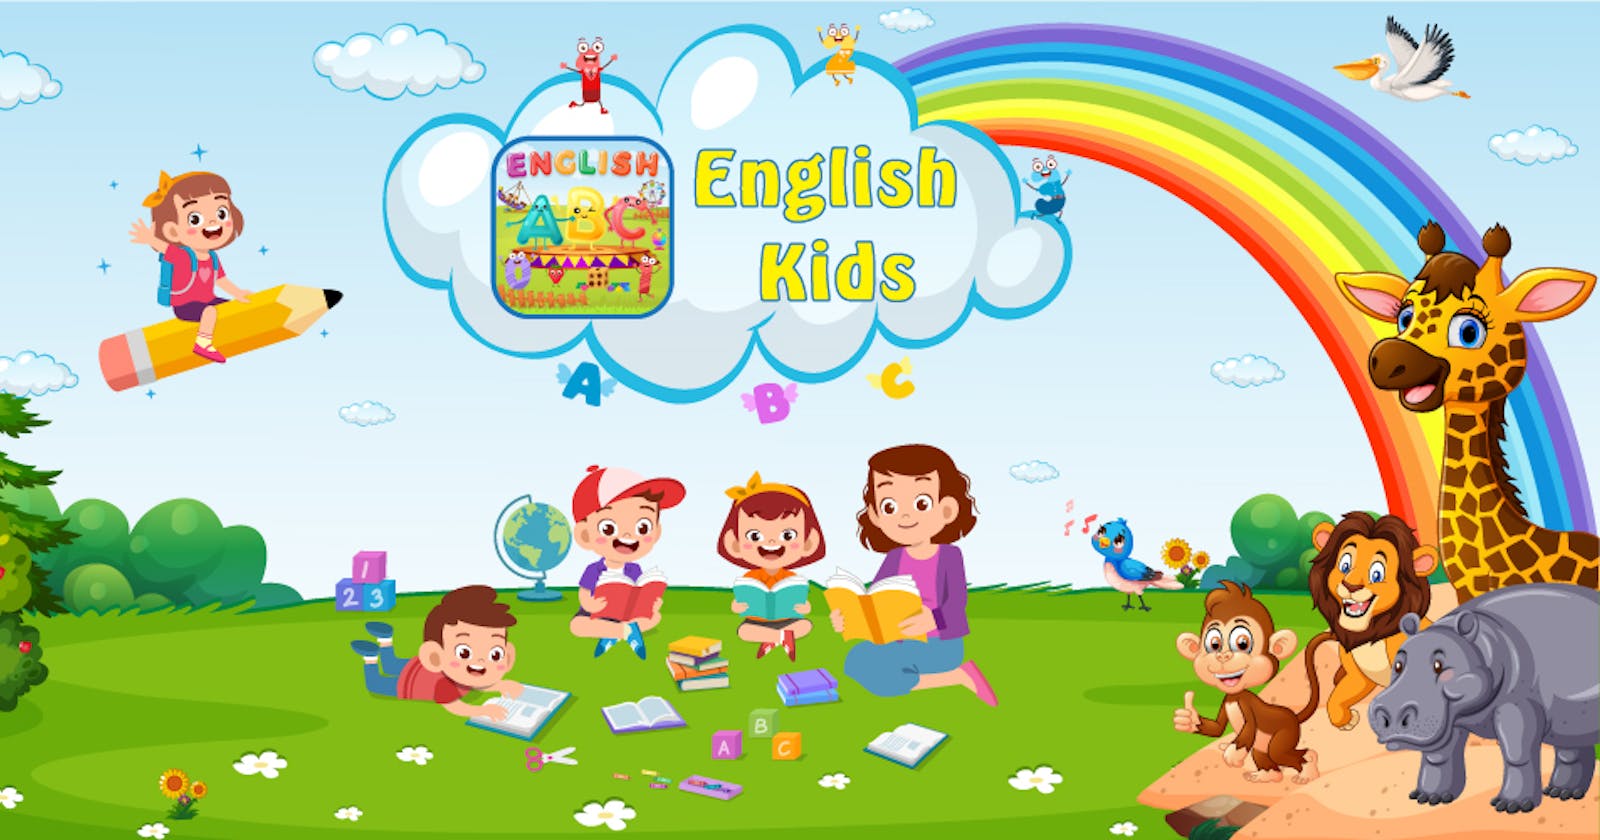 Boost Your Kids’ English Skills With This Amazing English Learning Game!